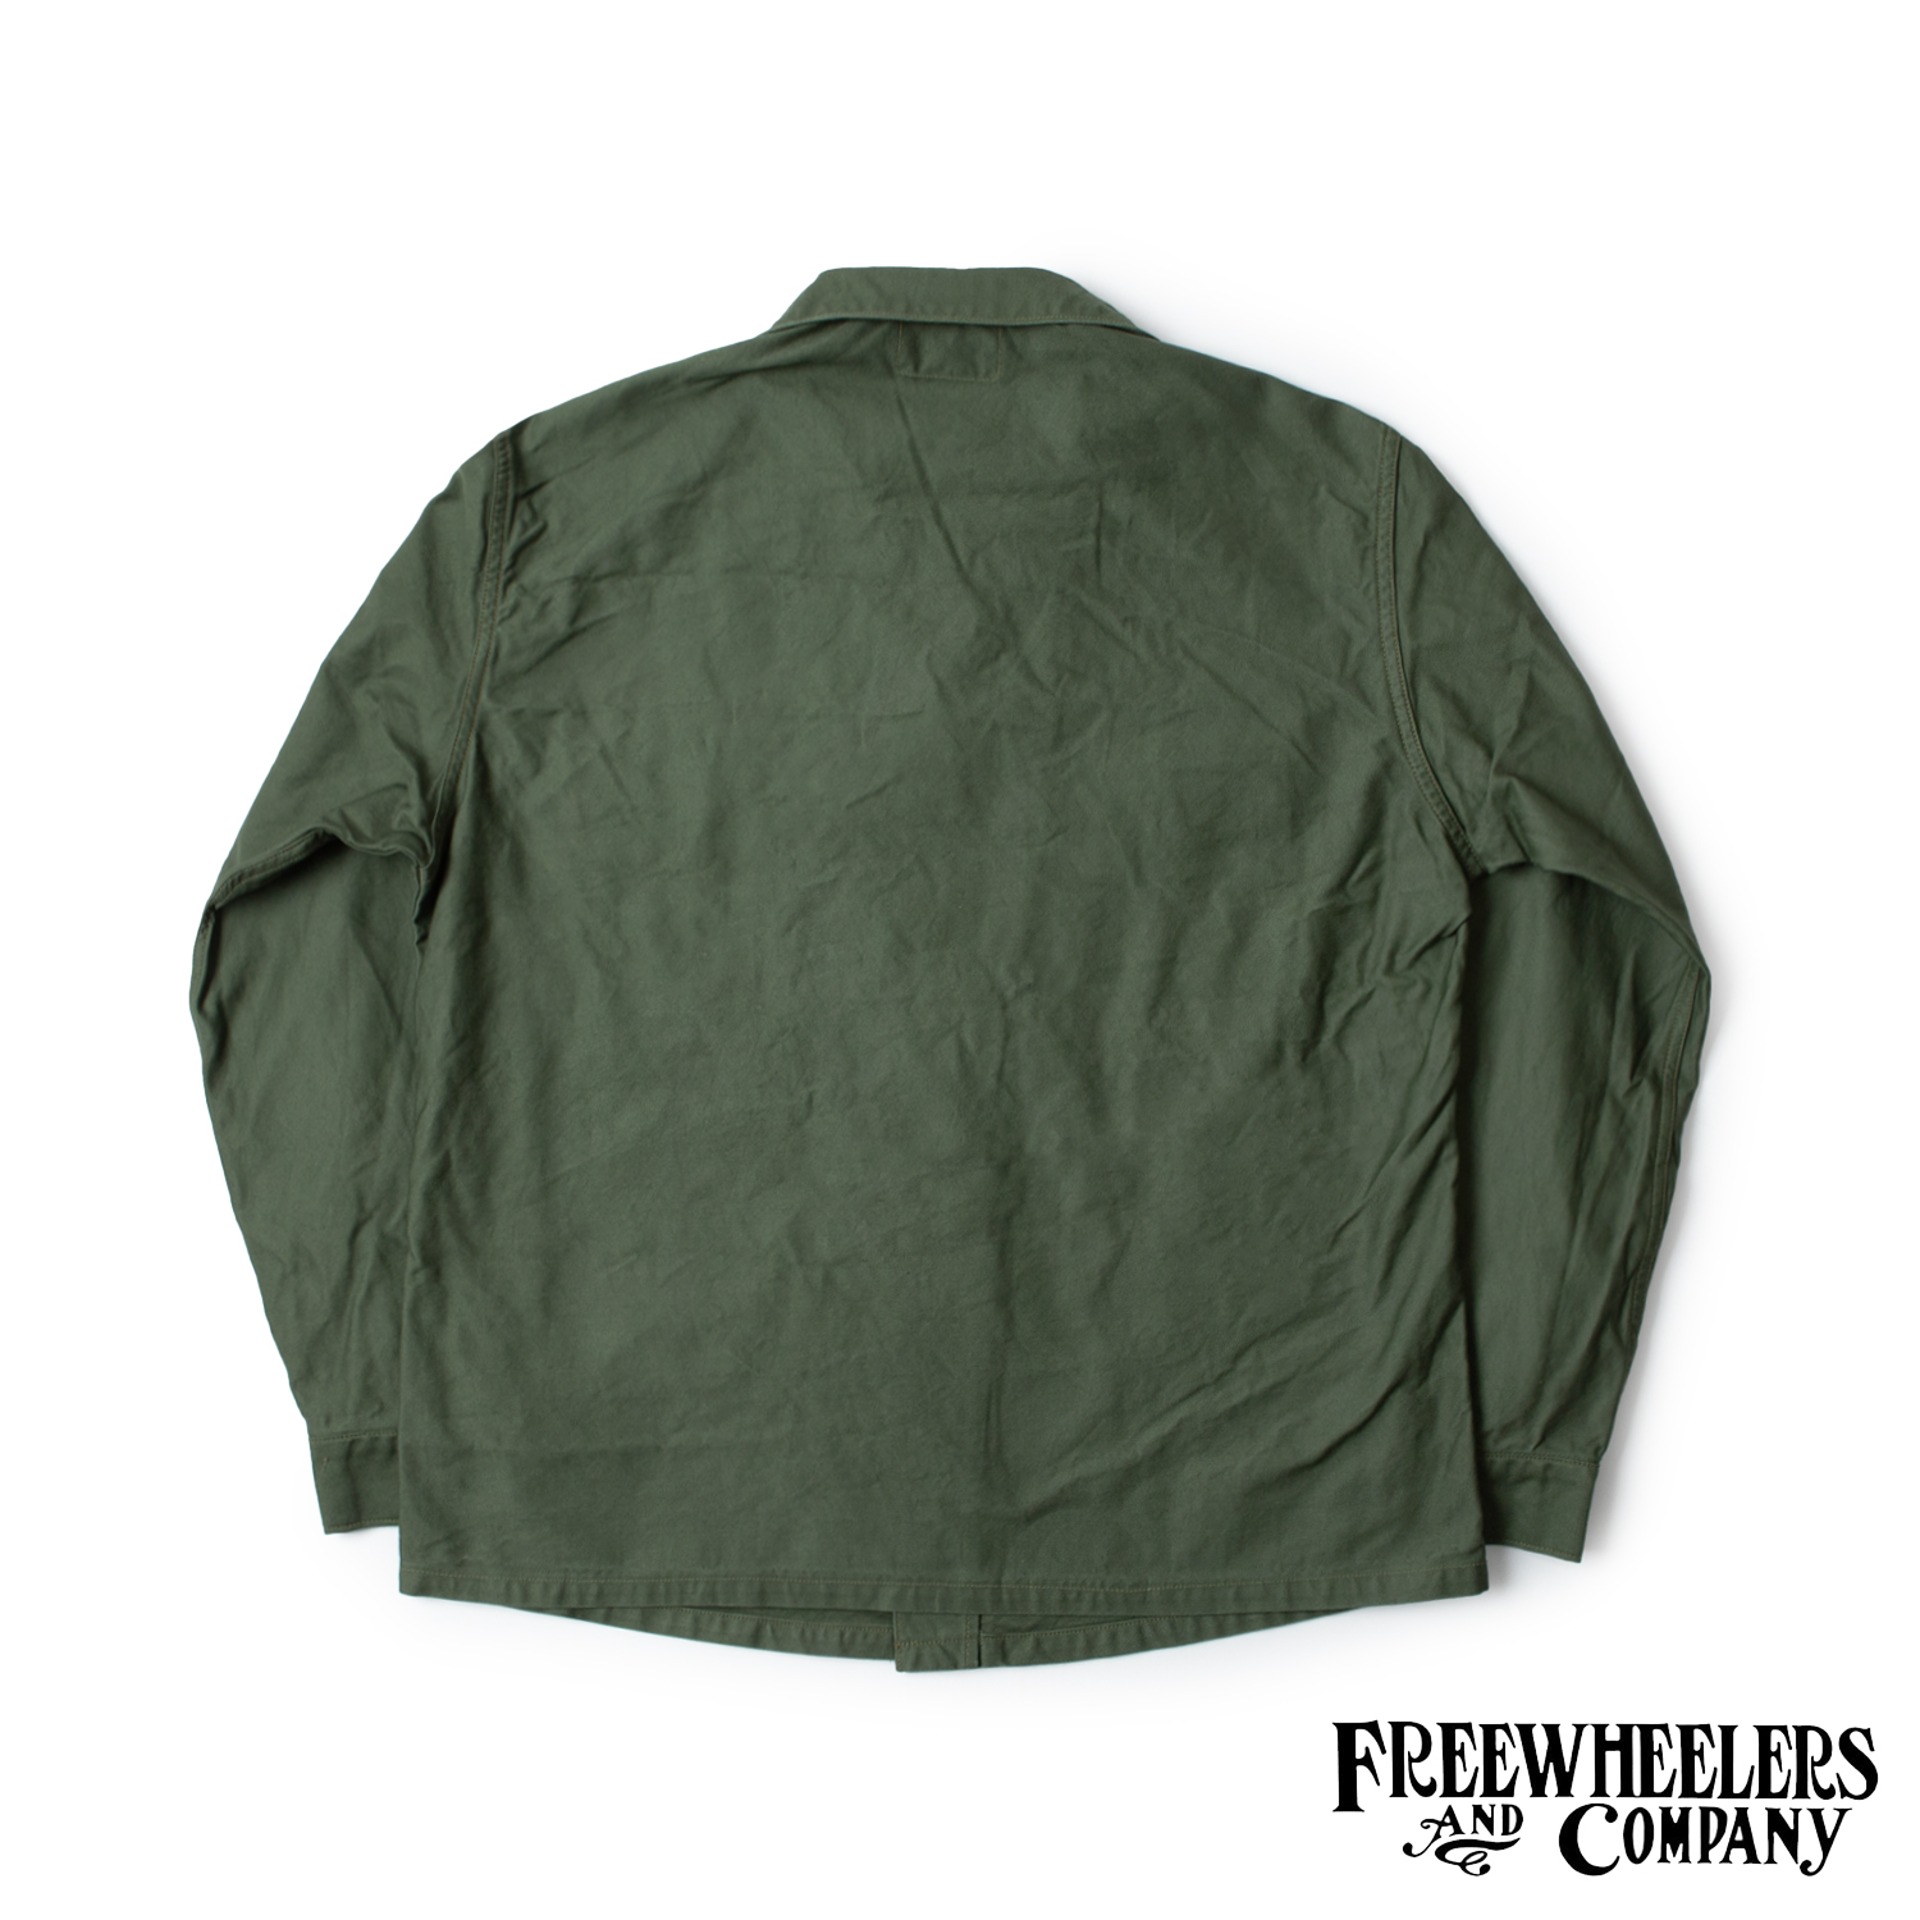  [UNION SPECIAL OVERALLS]  Military Jacket  “COMBAT UTILITY JACKET”  (Olive Green) (5/3 Open)